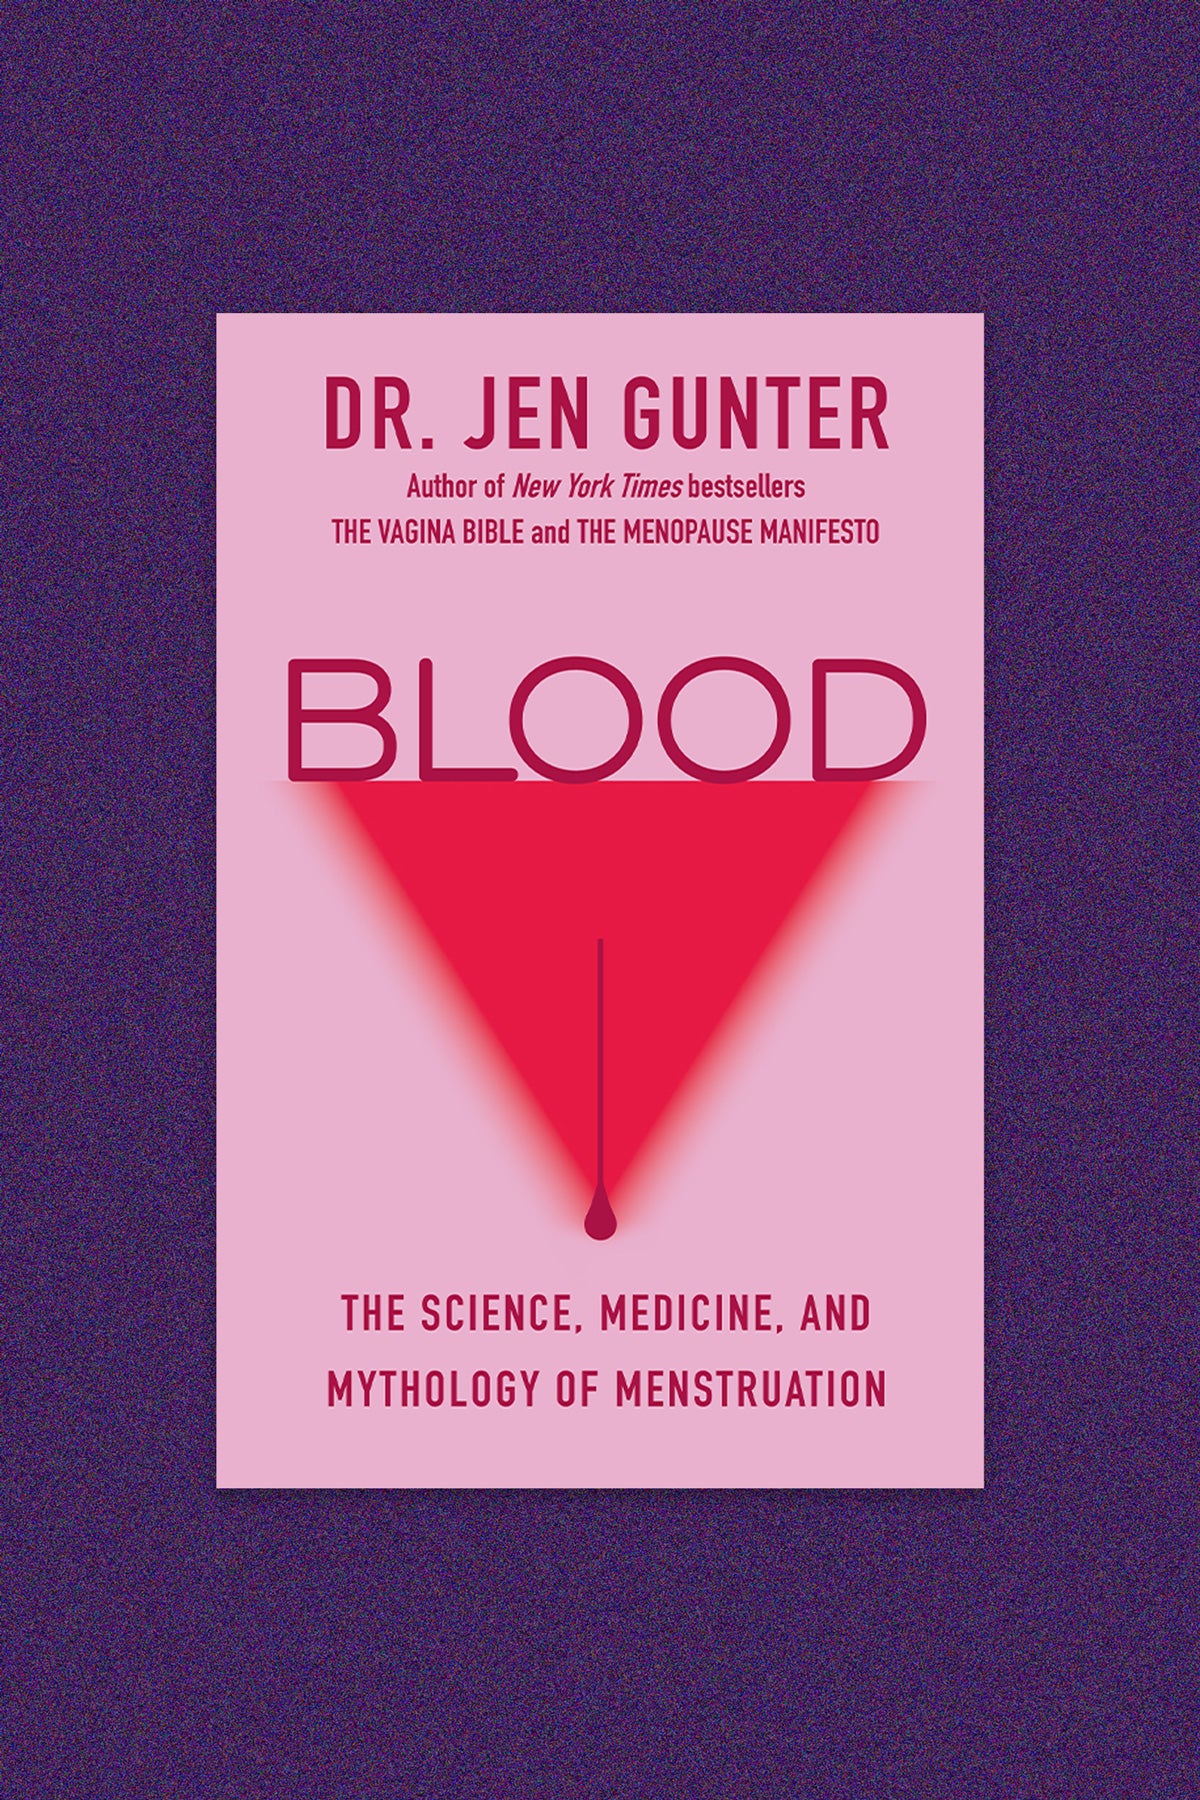 Book Cover: “Blood: The Science, medicine, and mythology of menstruation” by Dr. Jen Gunter. The cover is pink with red text and an inverted triangle with a single drop of blood at the tip. The book cover is on a purple speckled background.